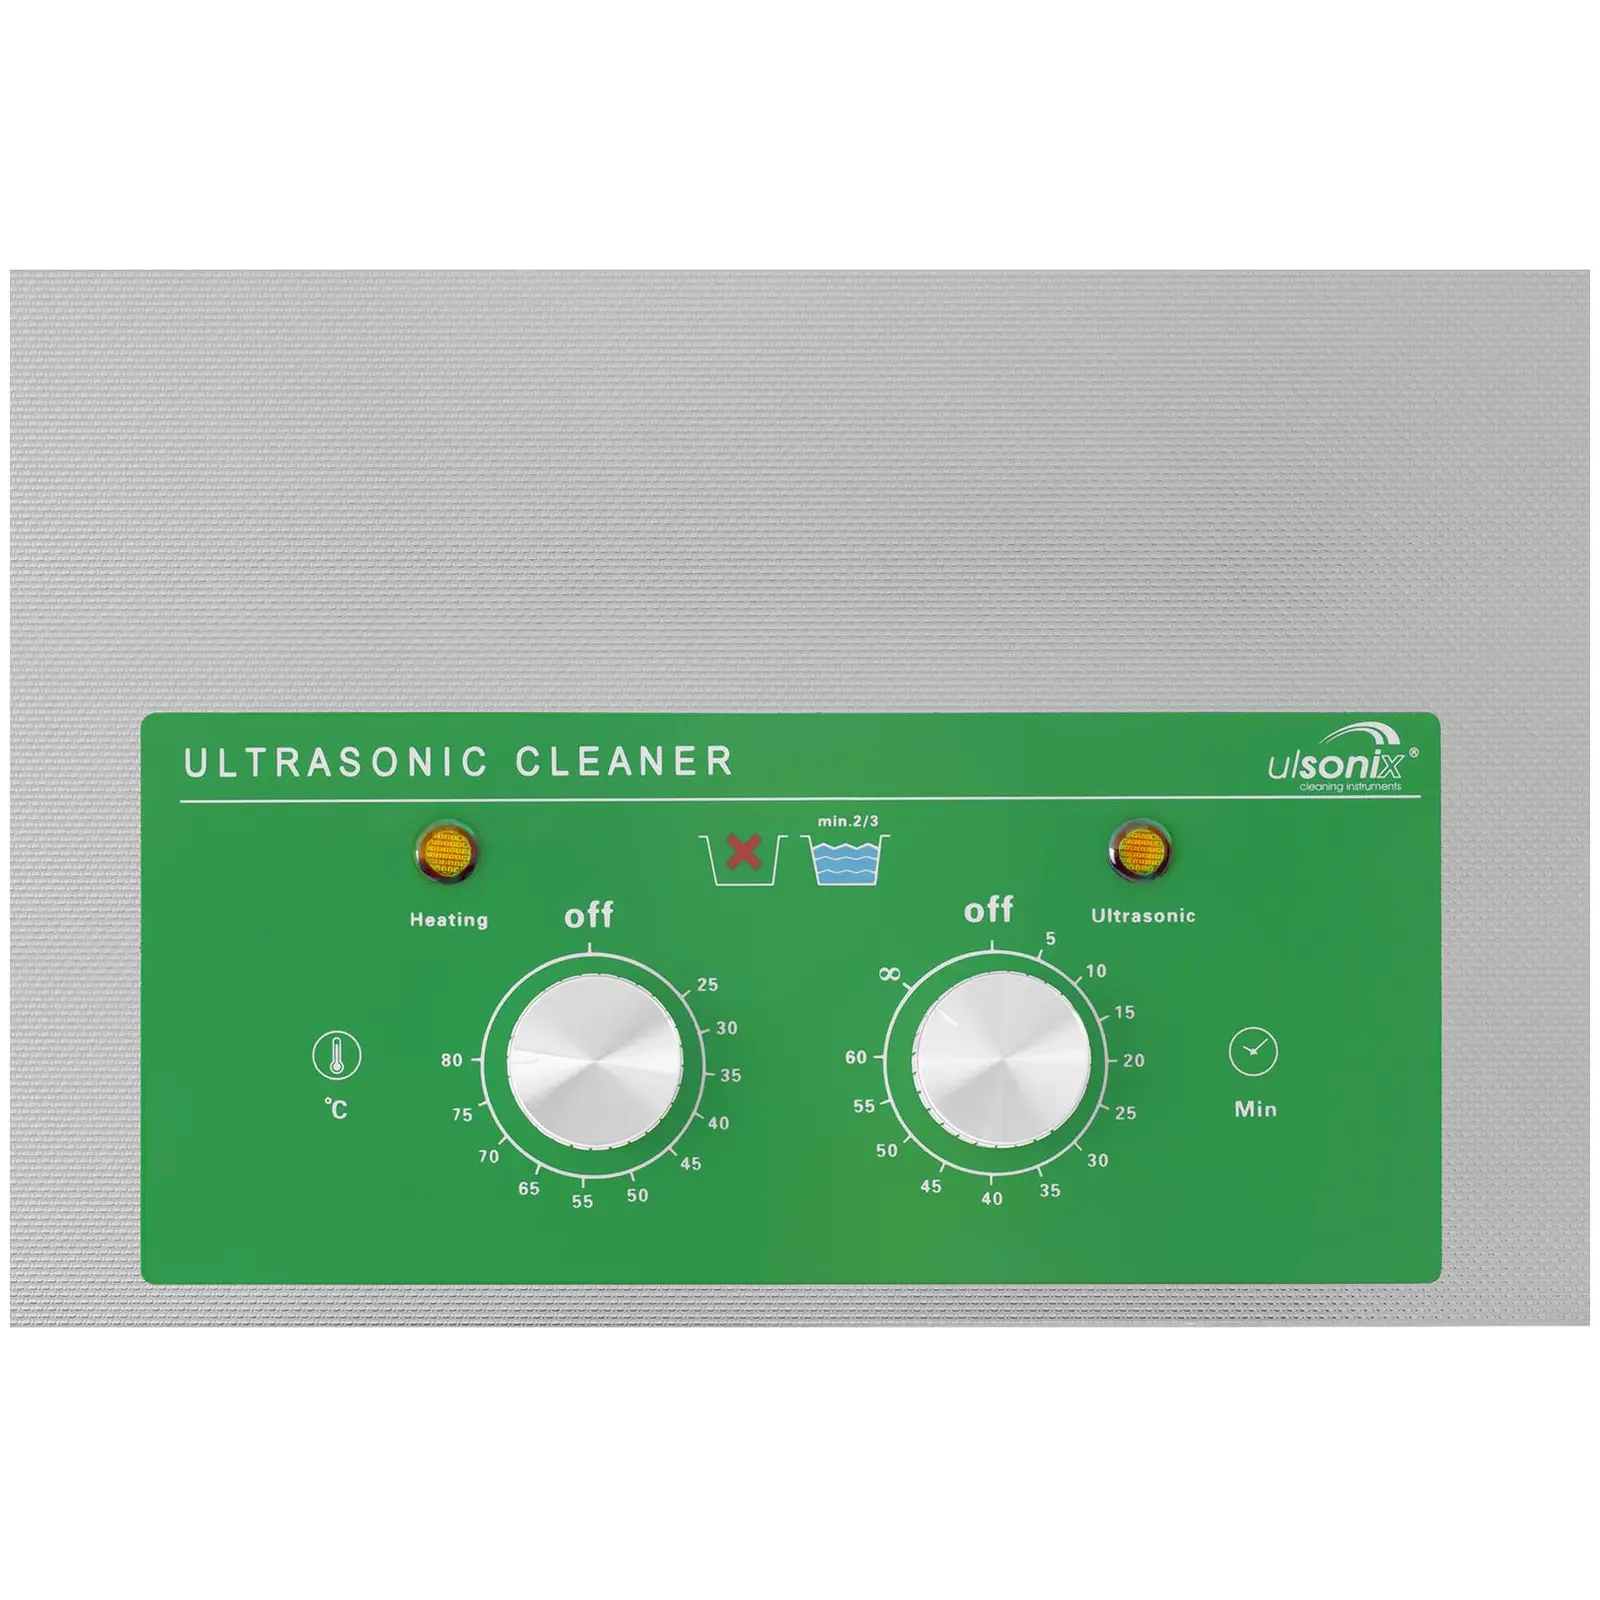 Ultrasonic cleaner - 10 litres - 180 W - Eco